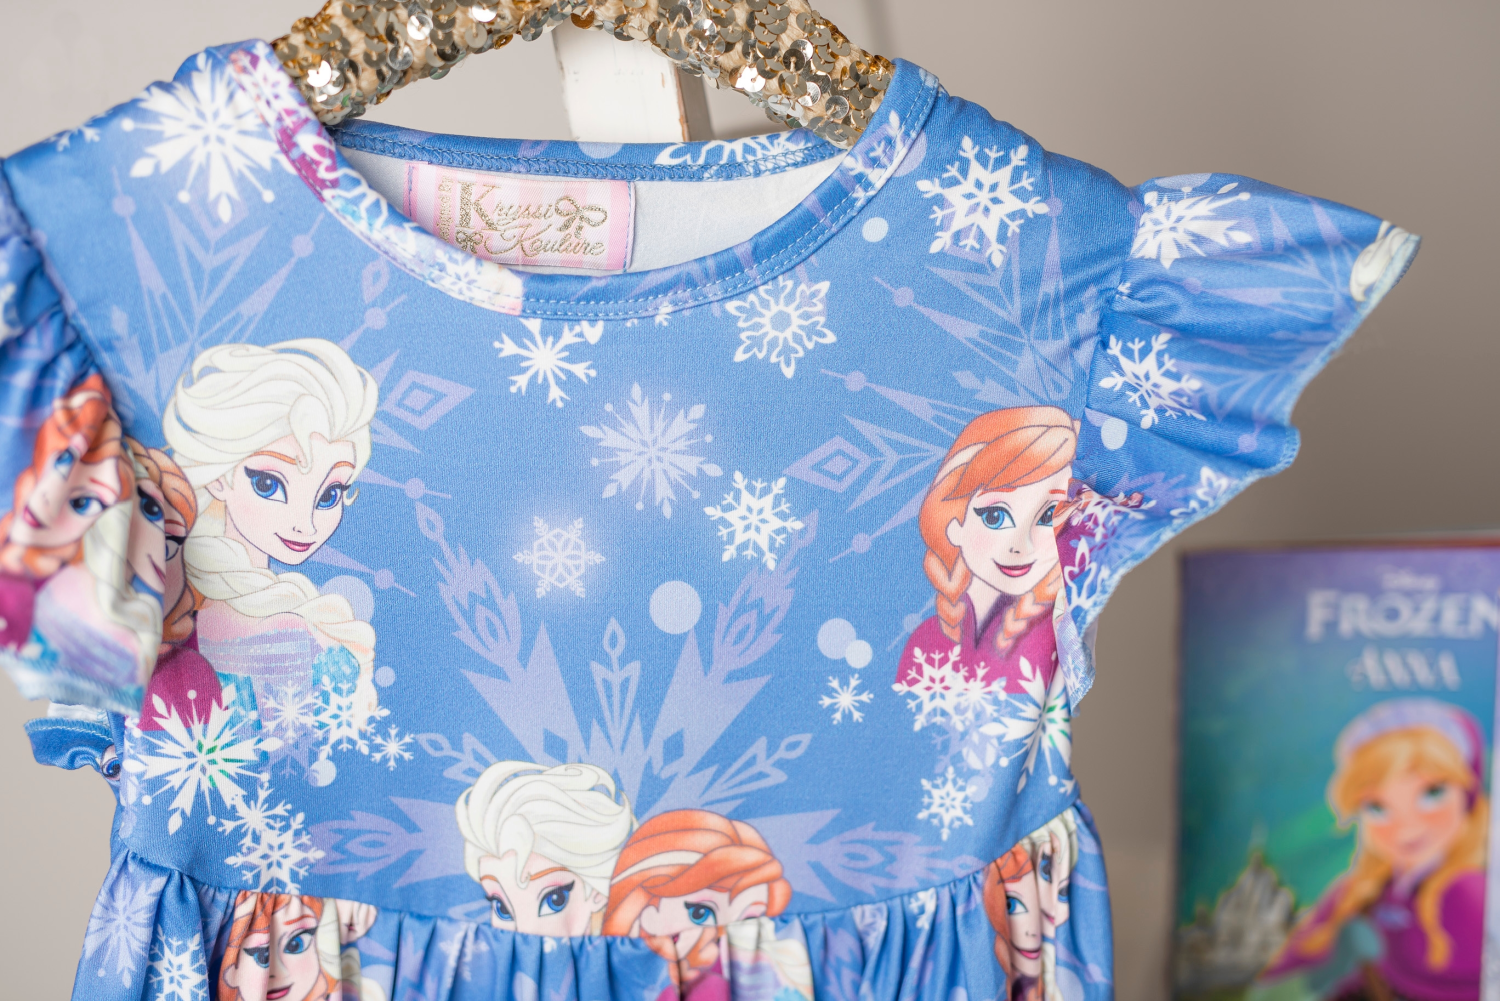 Girls Fun Character Dresses - Blue Sister Snowflake - anna and elsa from frozen